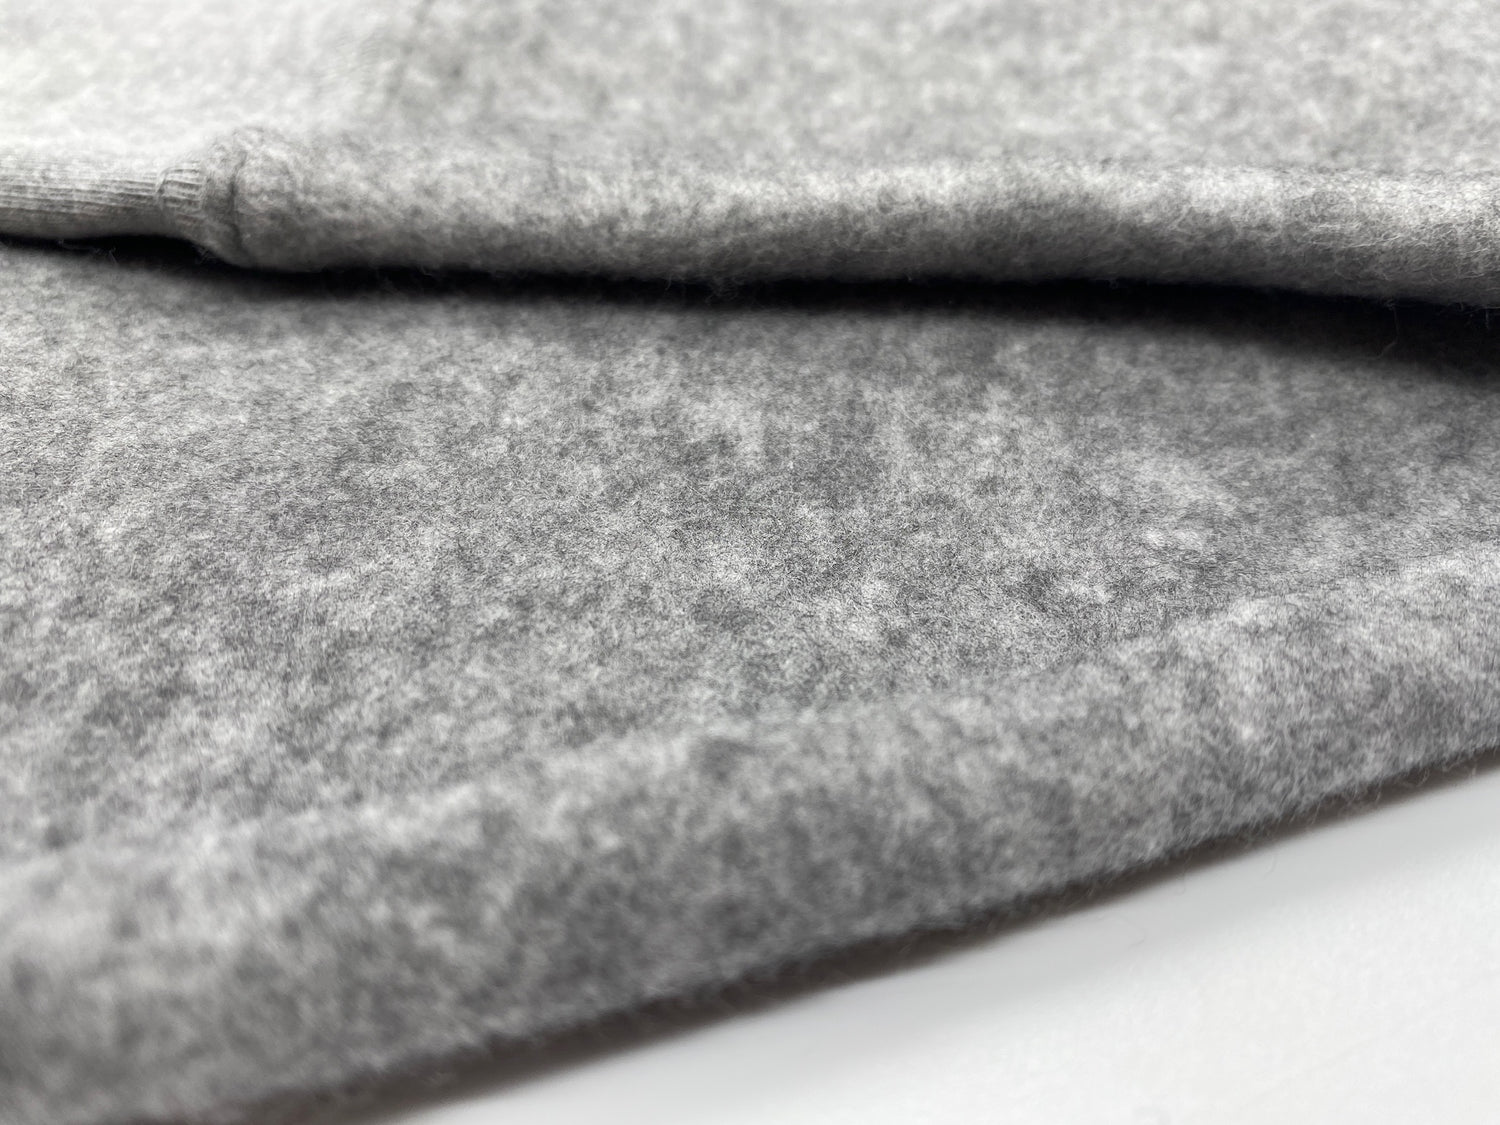 Close up of sweatshirt fabric, showing tufted, fuzzy texture.